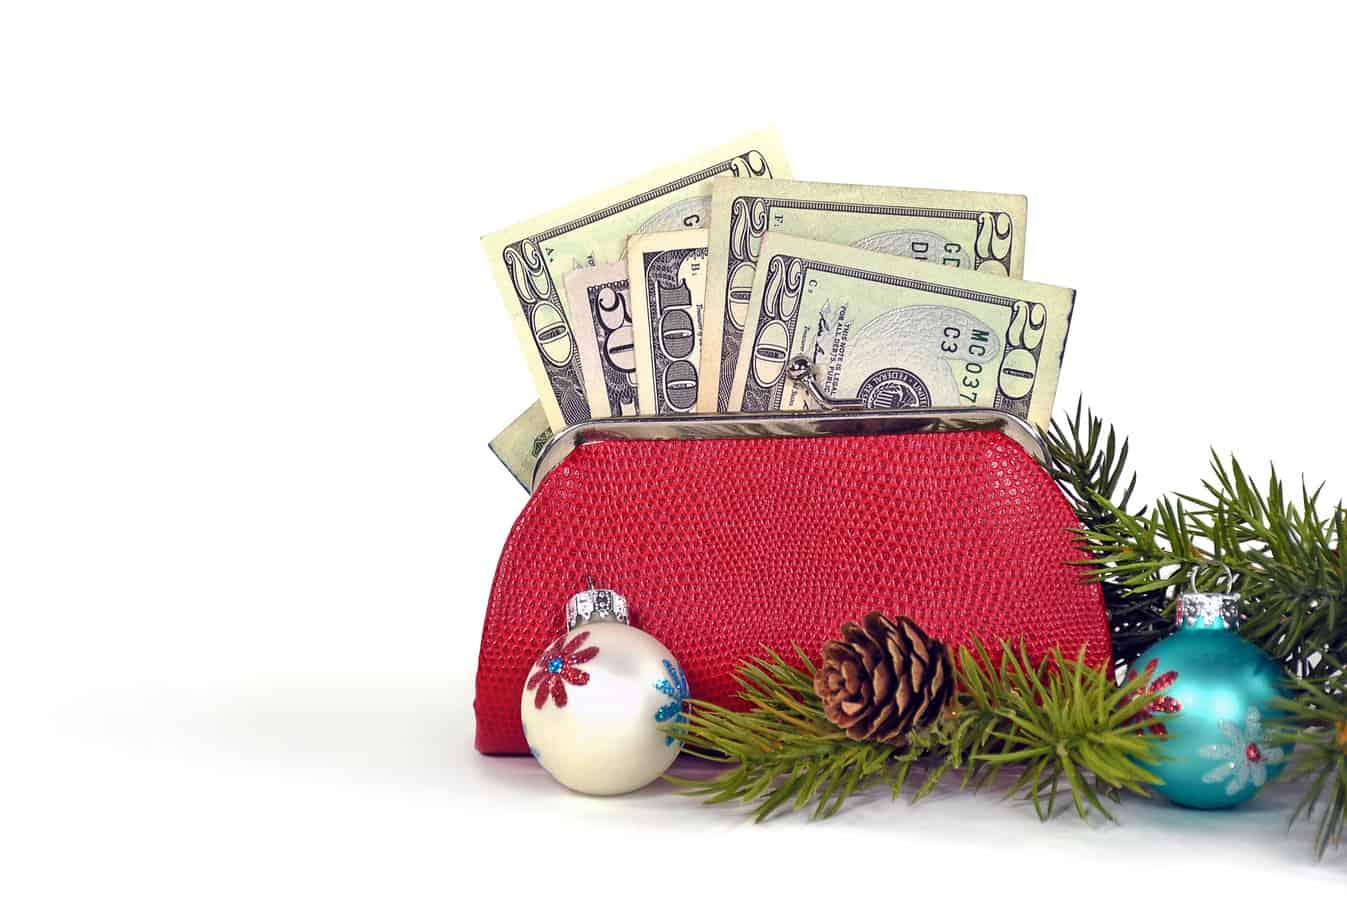 How to Make Quick Cash For The Holidays - Life and a Budget